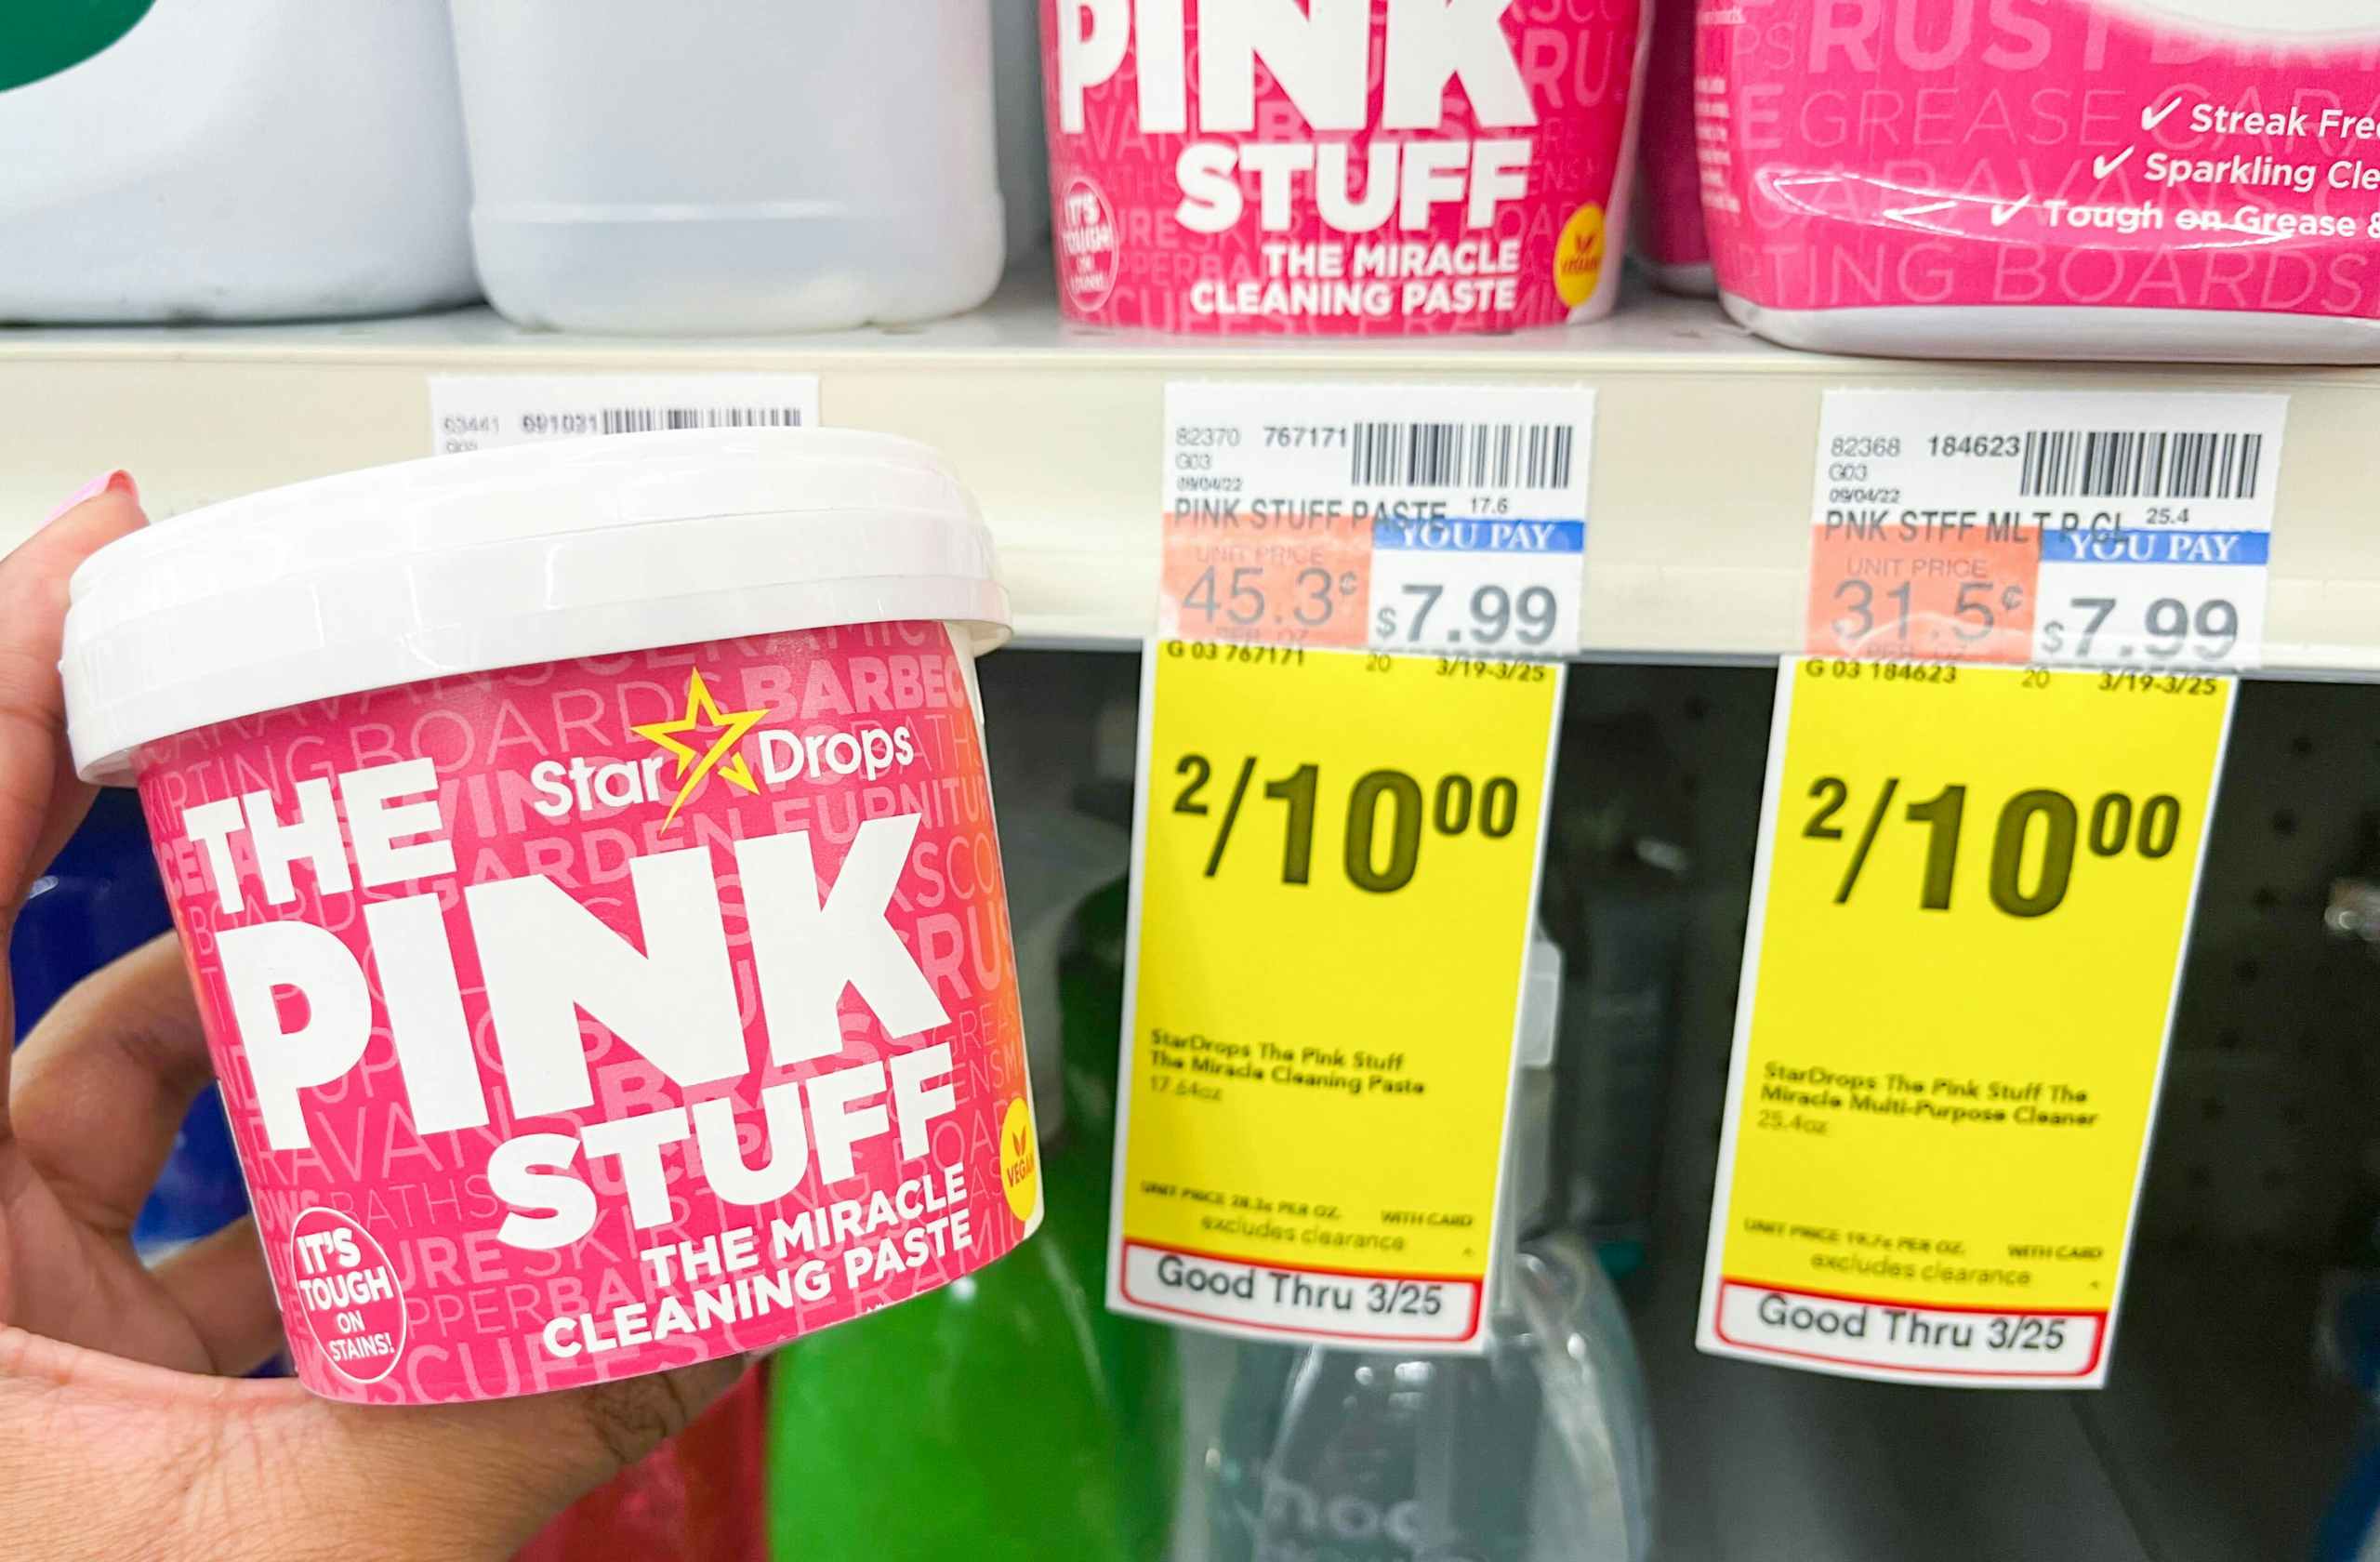 hand holding The Pink Stuff paste next to sales tag